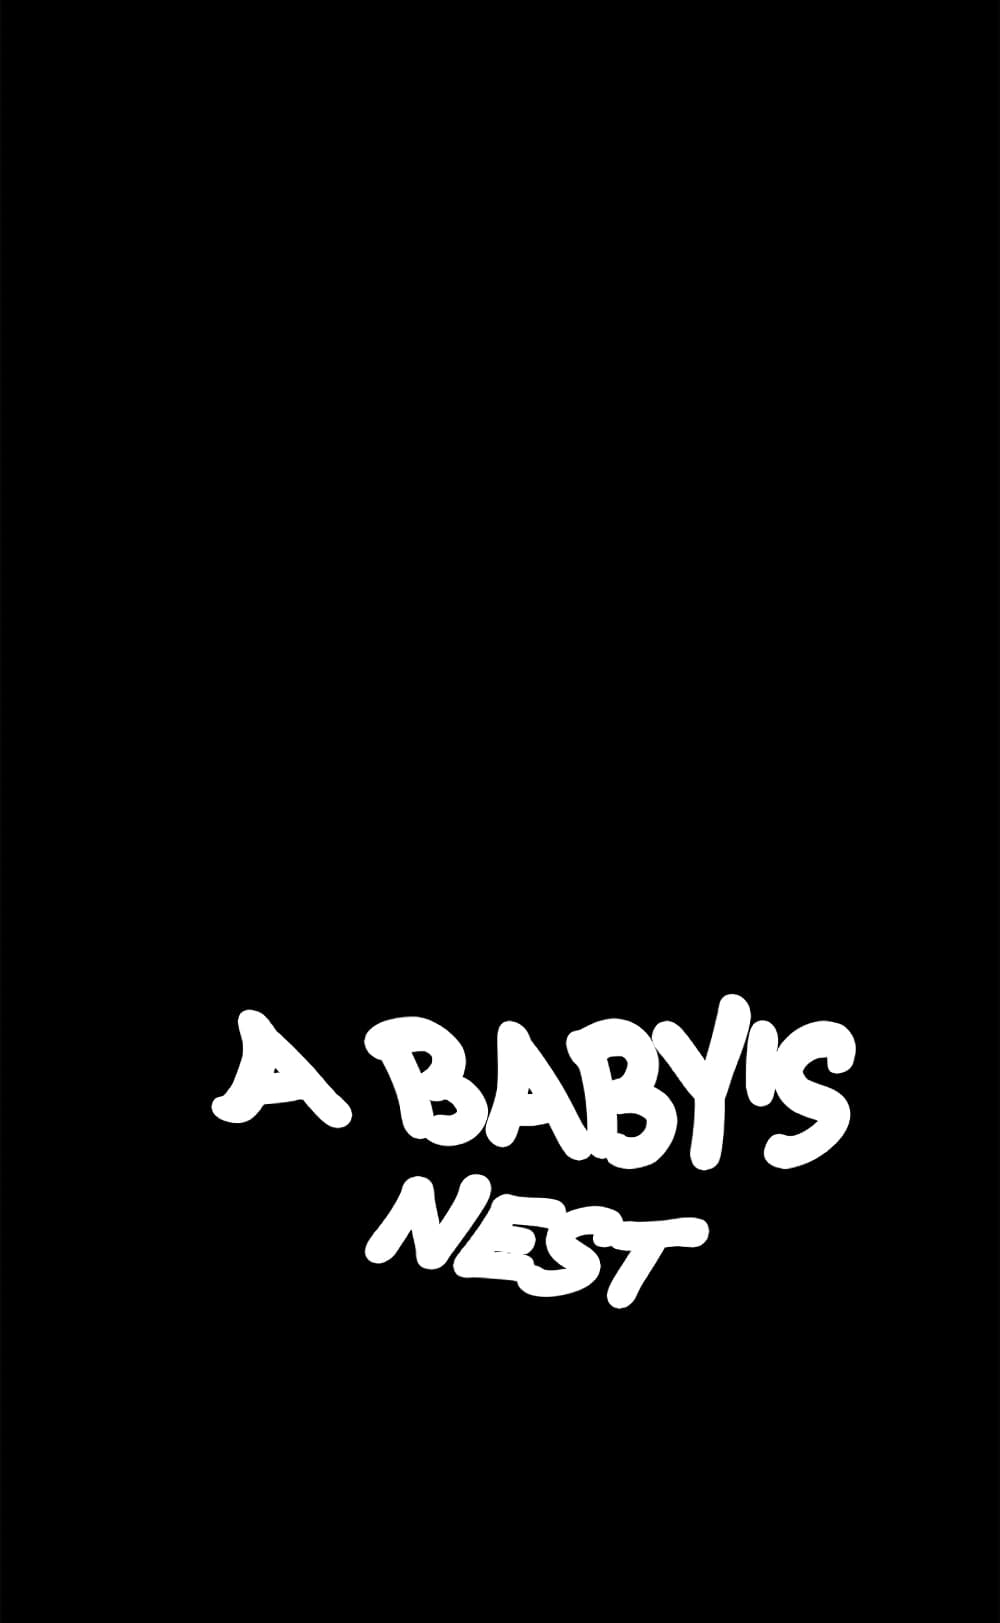 A Baby's Nest 5-5